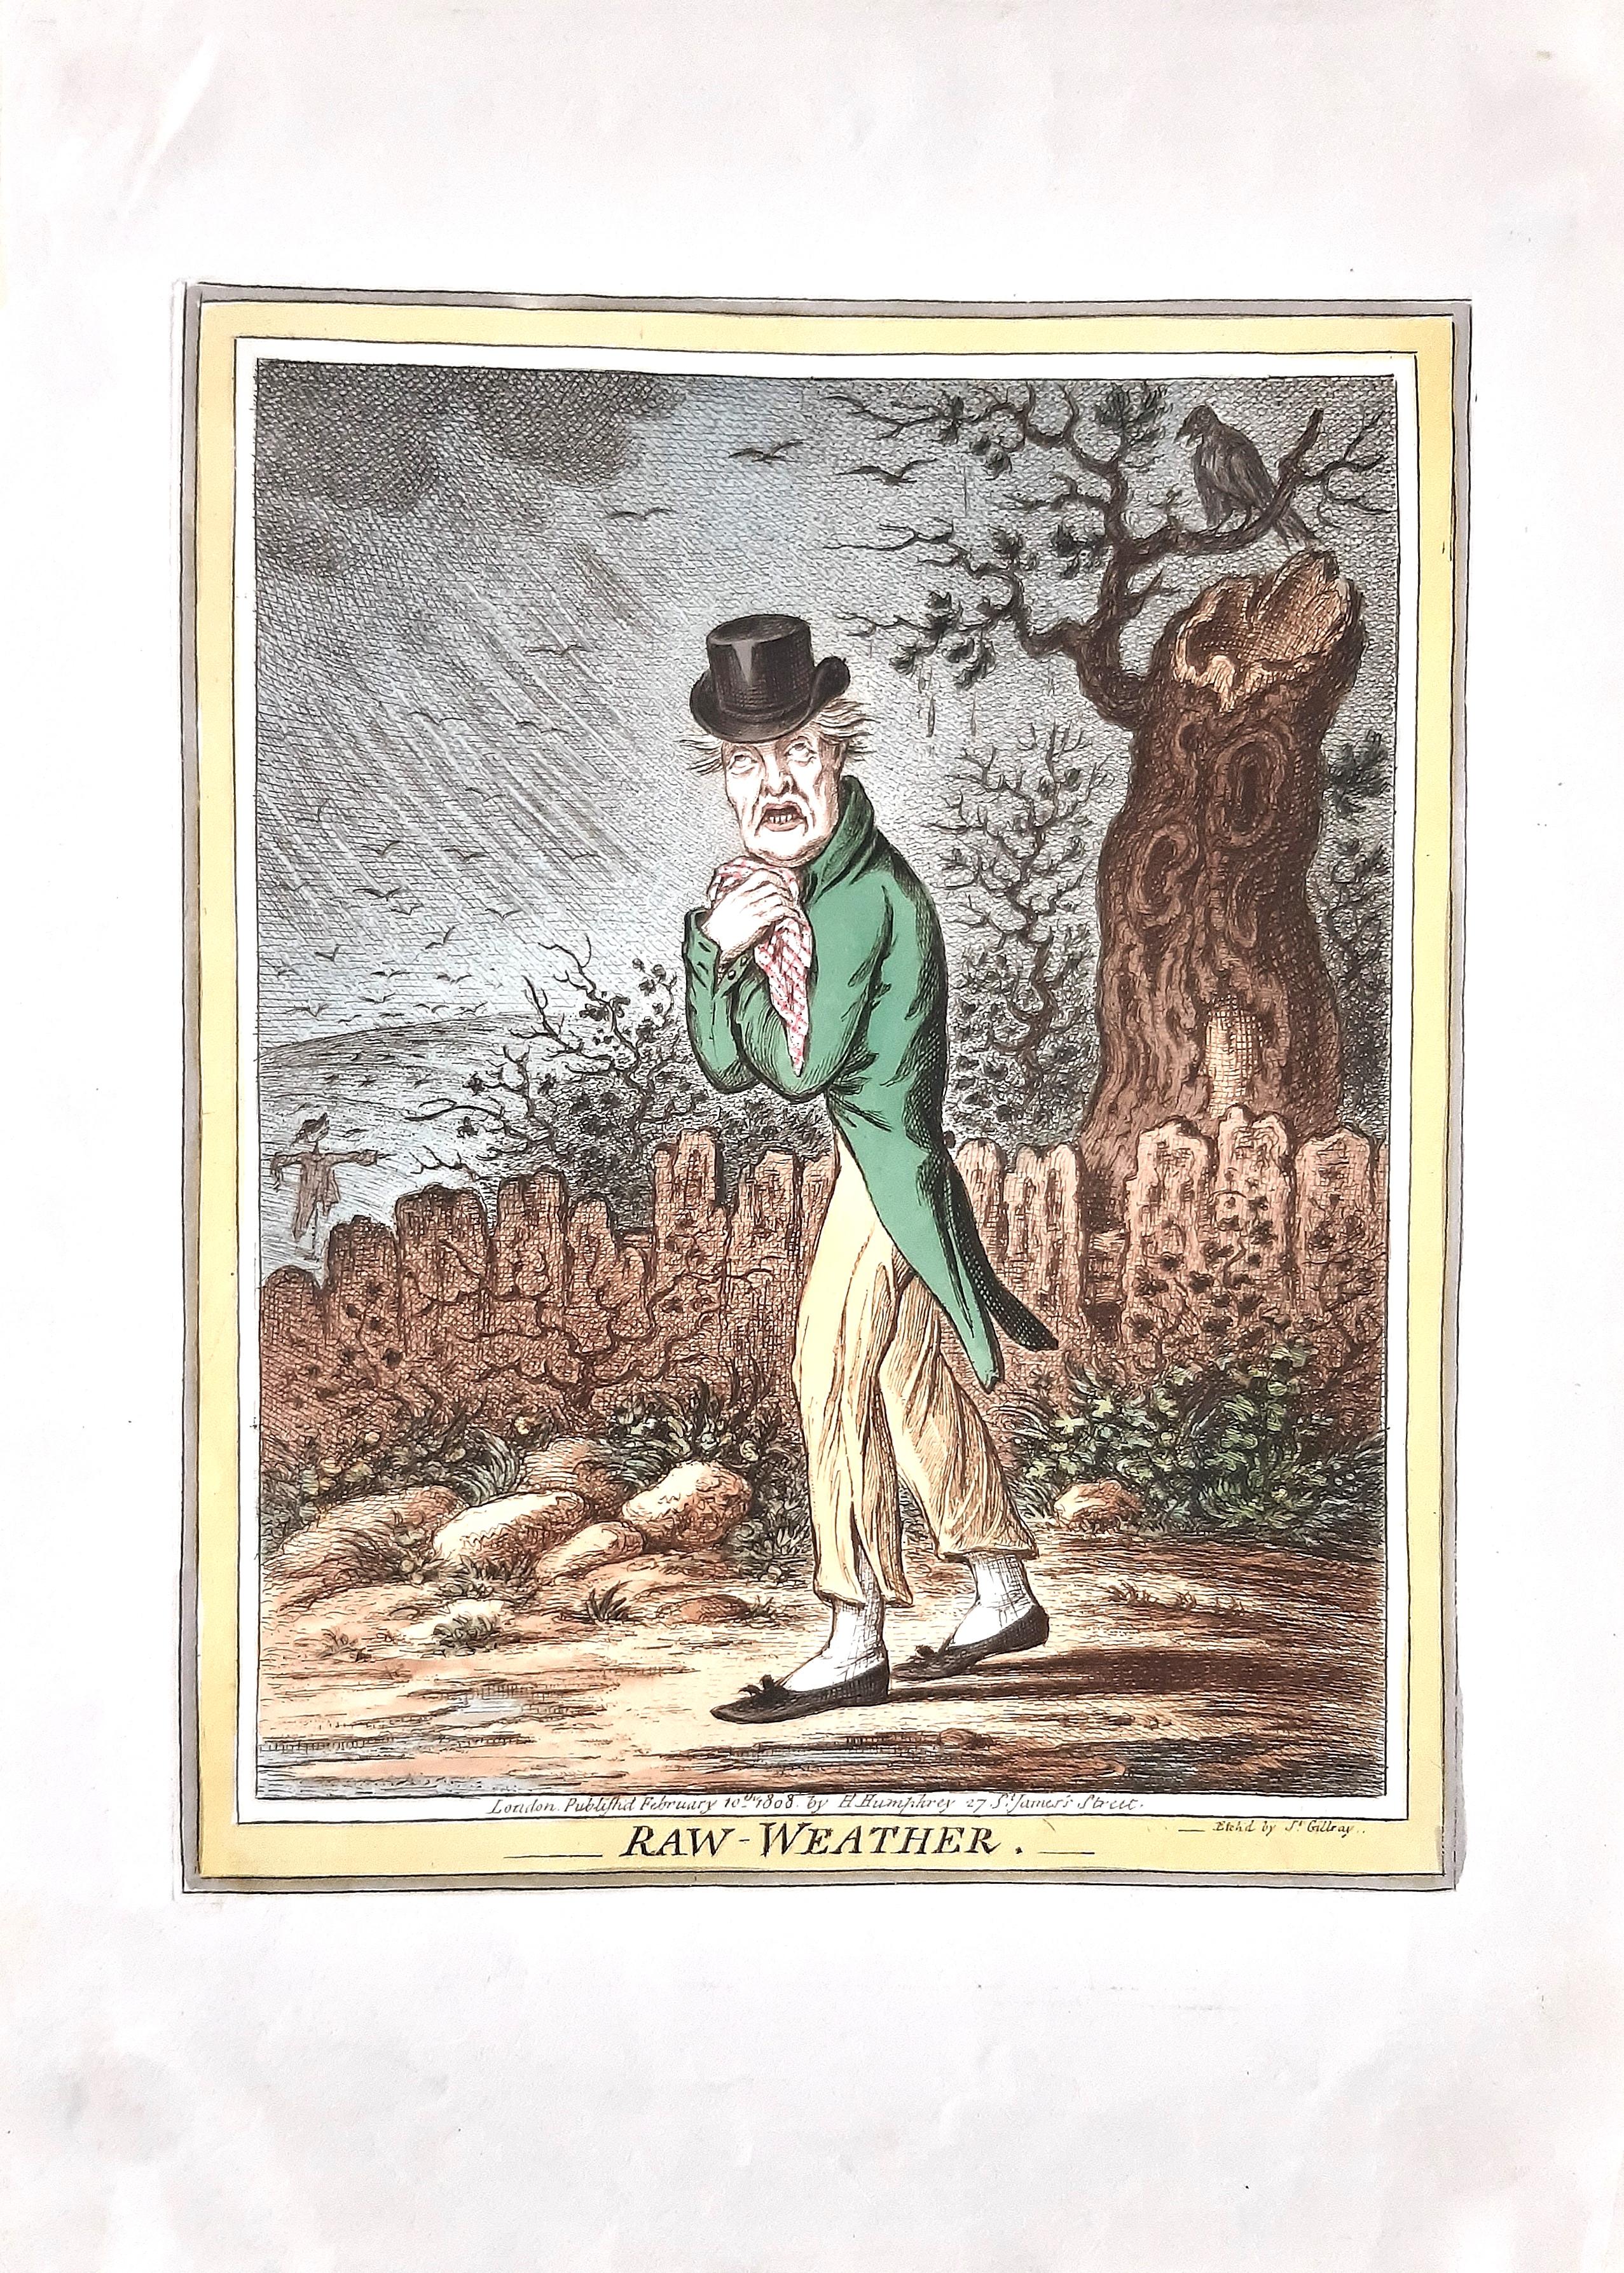 Delicious Weather - Complete Series of 5 Hand-colored Etchings - 1808 2